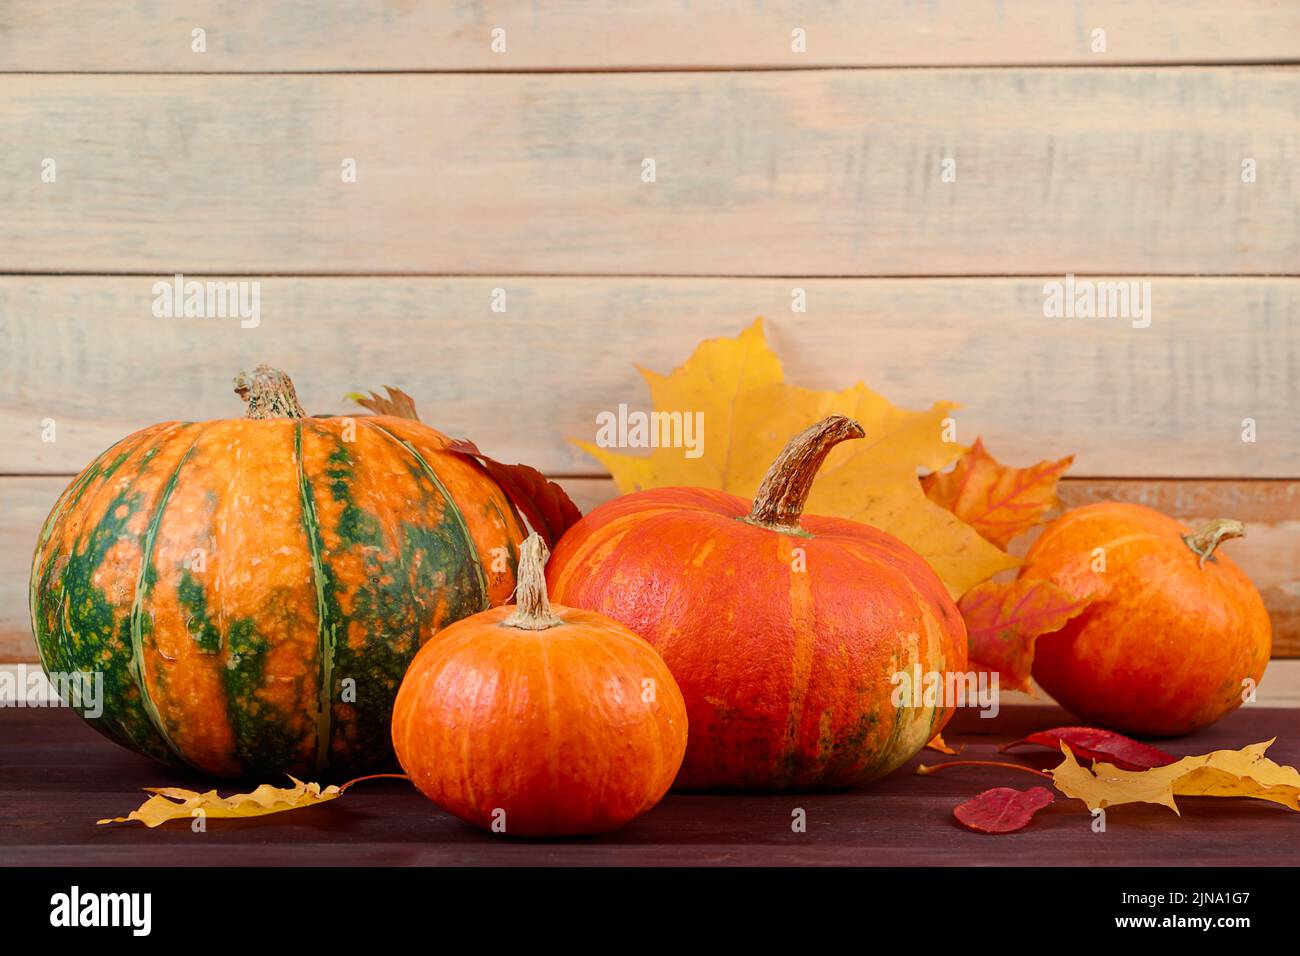 Autumn harvest. Ripe pumpkins and fallen leaves on a wooden background. Thanksgiving and halloween concept. Copy space. Stock Photo